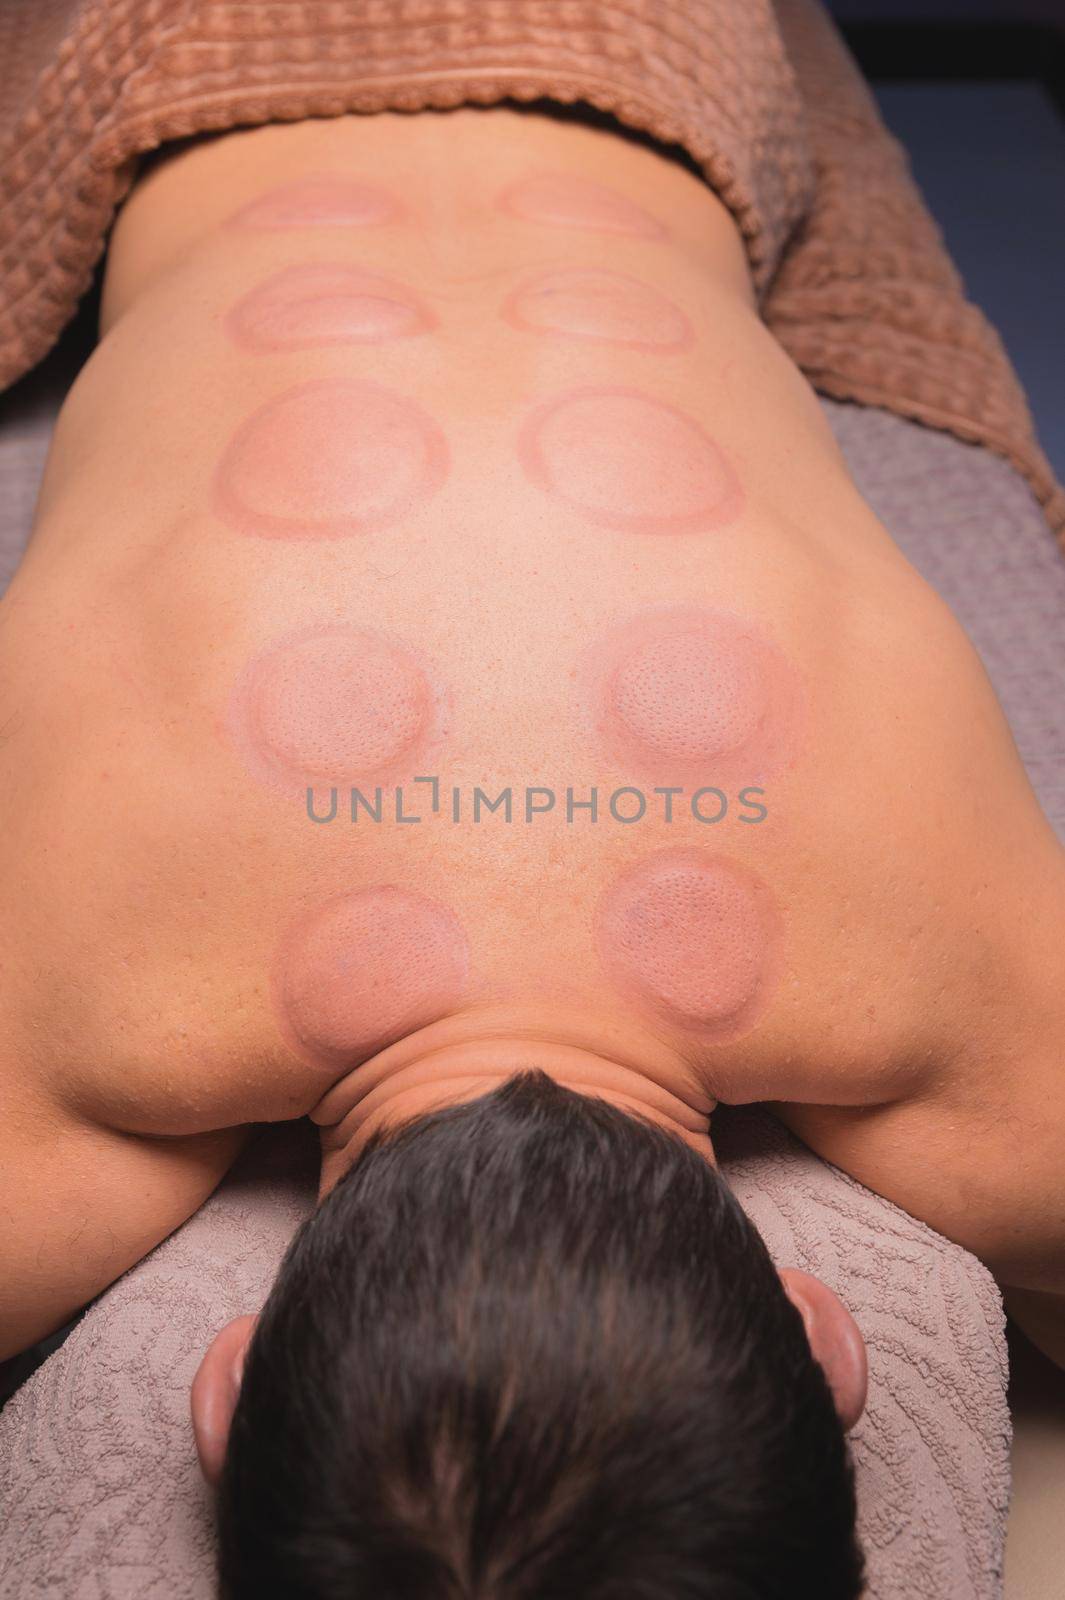 Man after cupping therapy on his back. Skin after cupping in traditional Chinese medicine. man returned from hijama cups in acupuncture therapy. Chinese traditional treatment. by yanik88